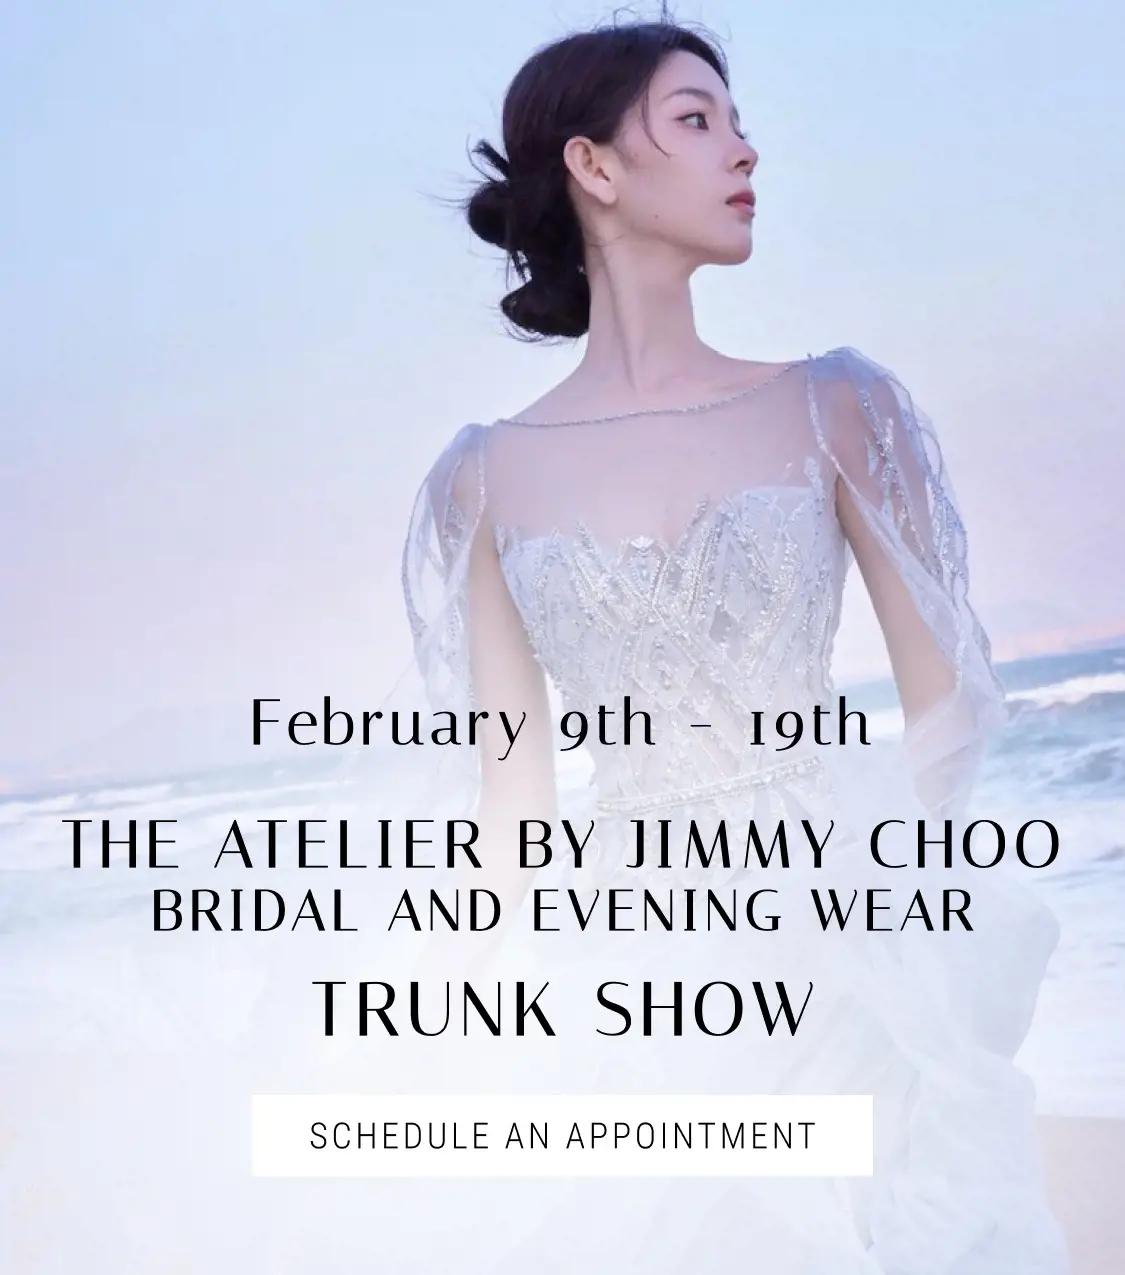 "Jimmy Choo Trunk Show" banner for mobile